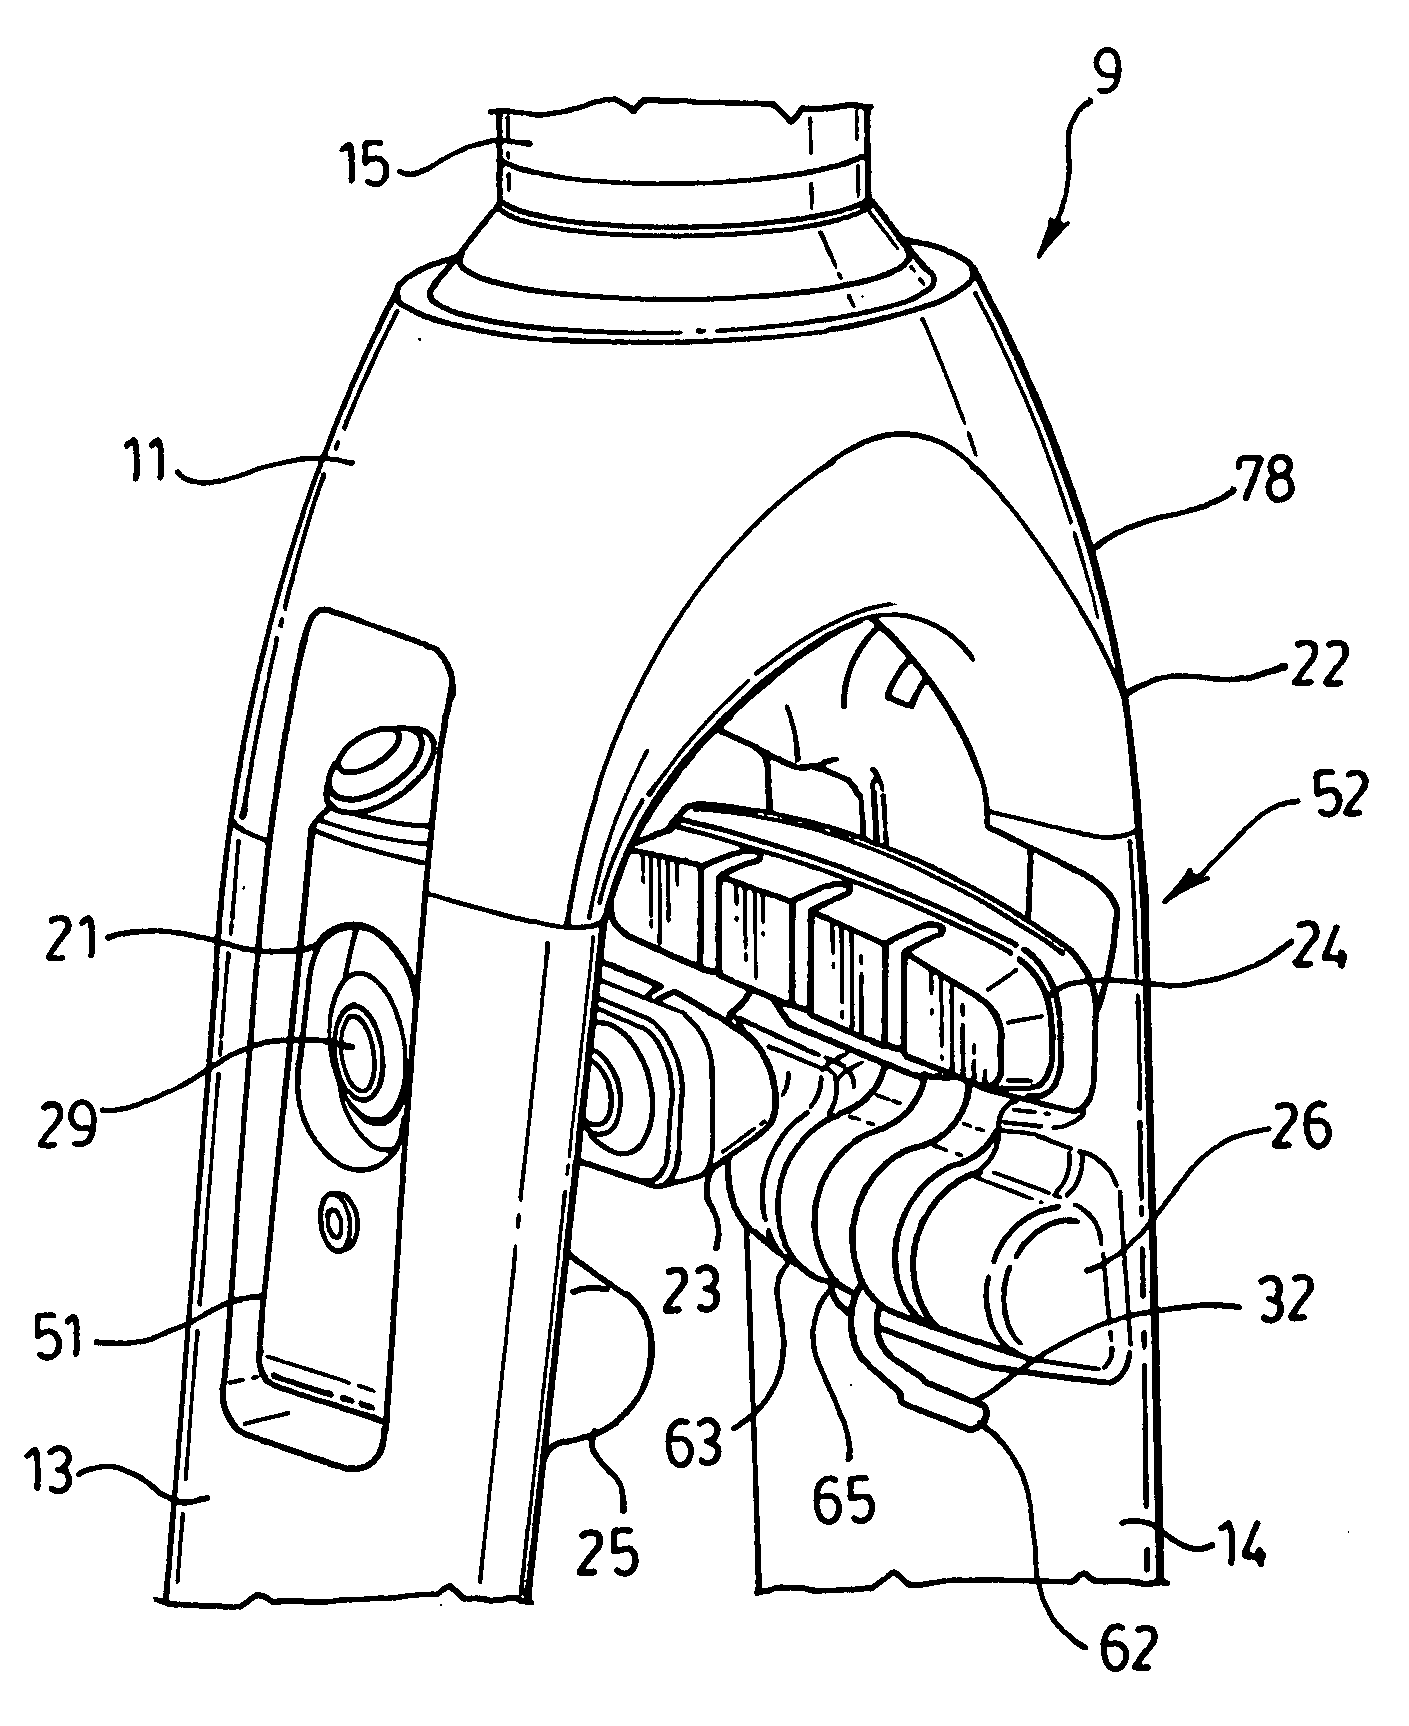 Fork with integrated braking system